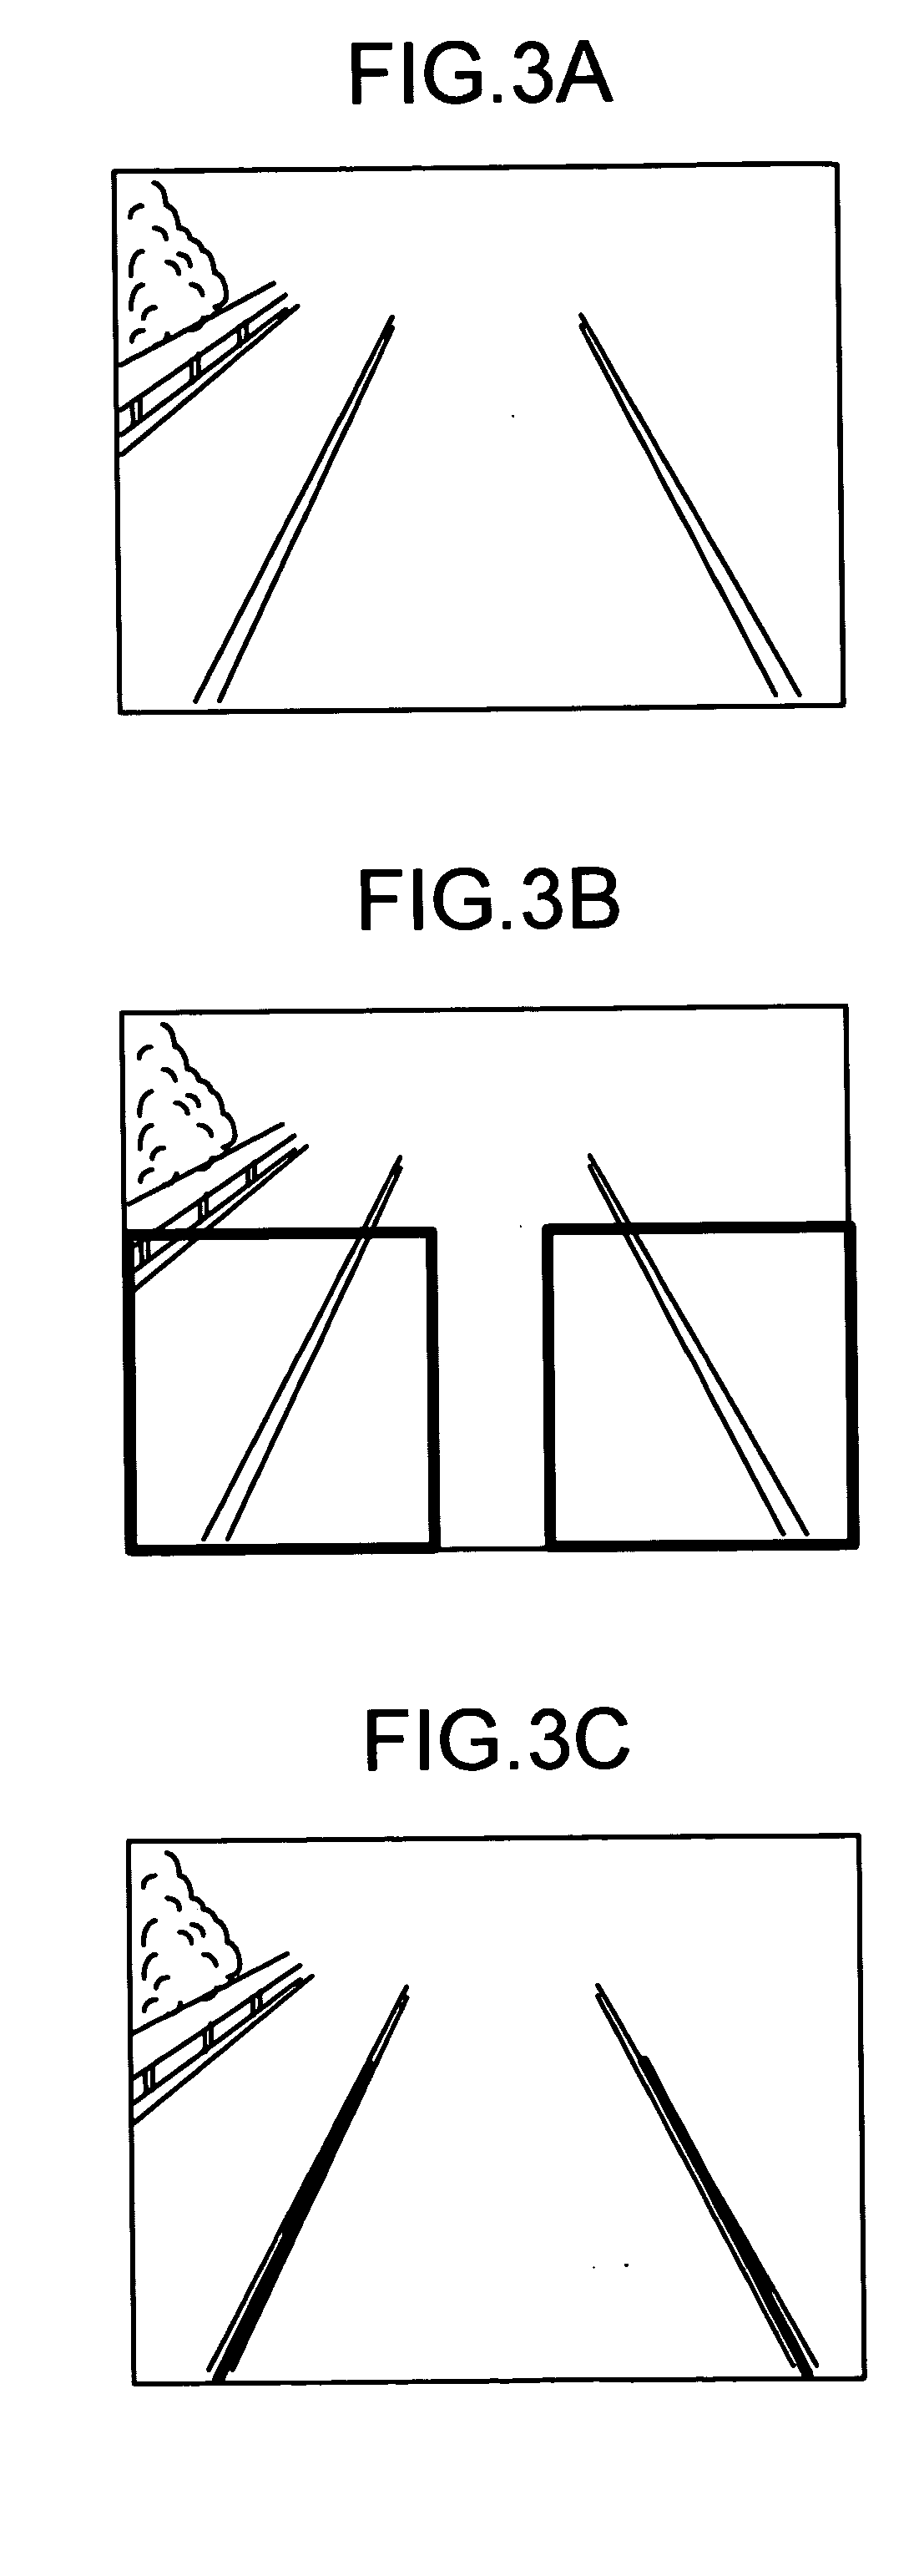 Method and apparatus for determining driving lane of vehicle, and computer product